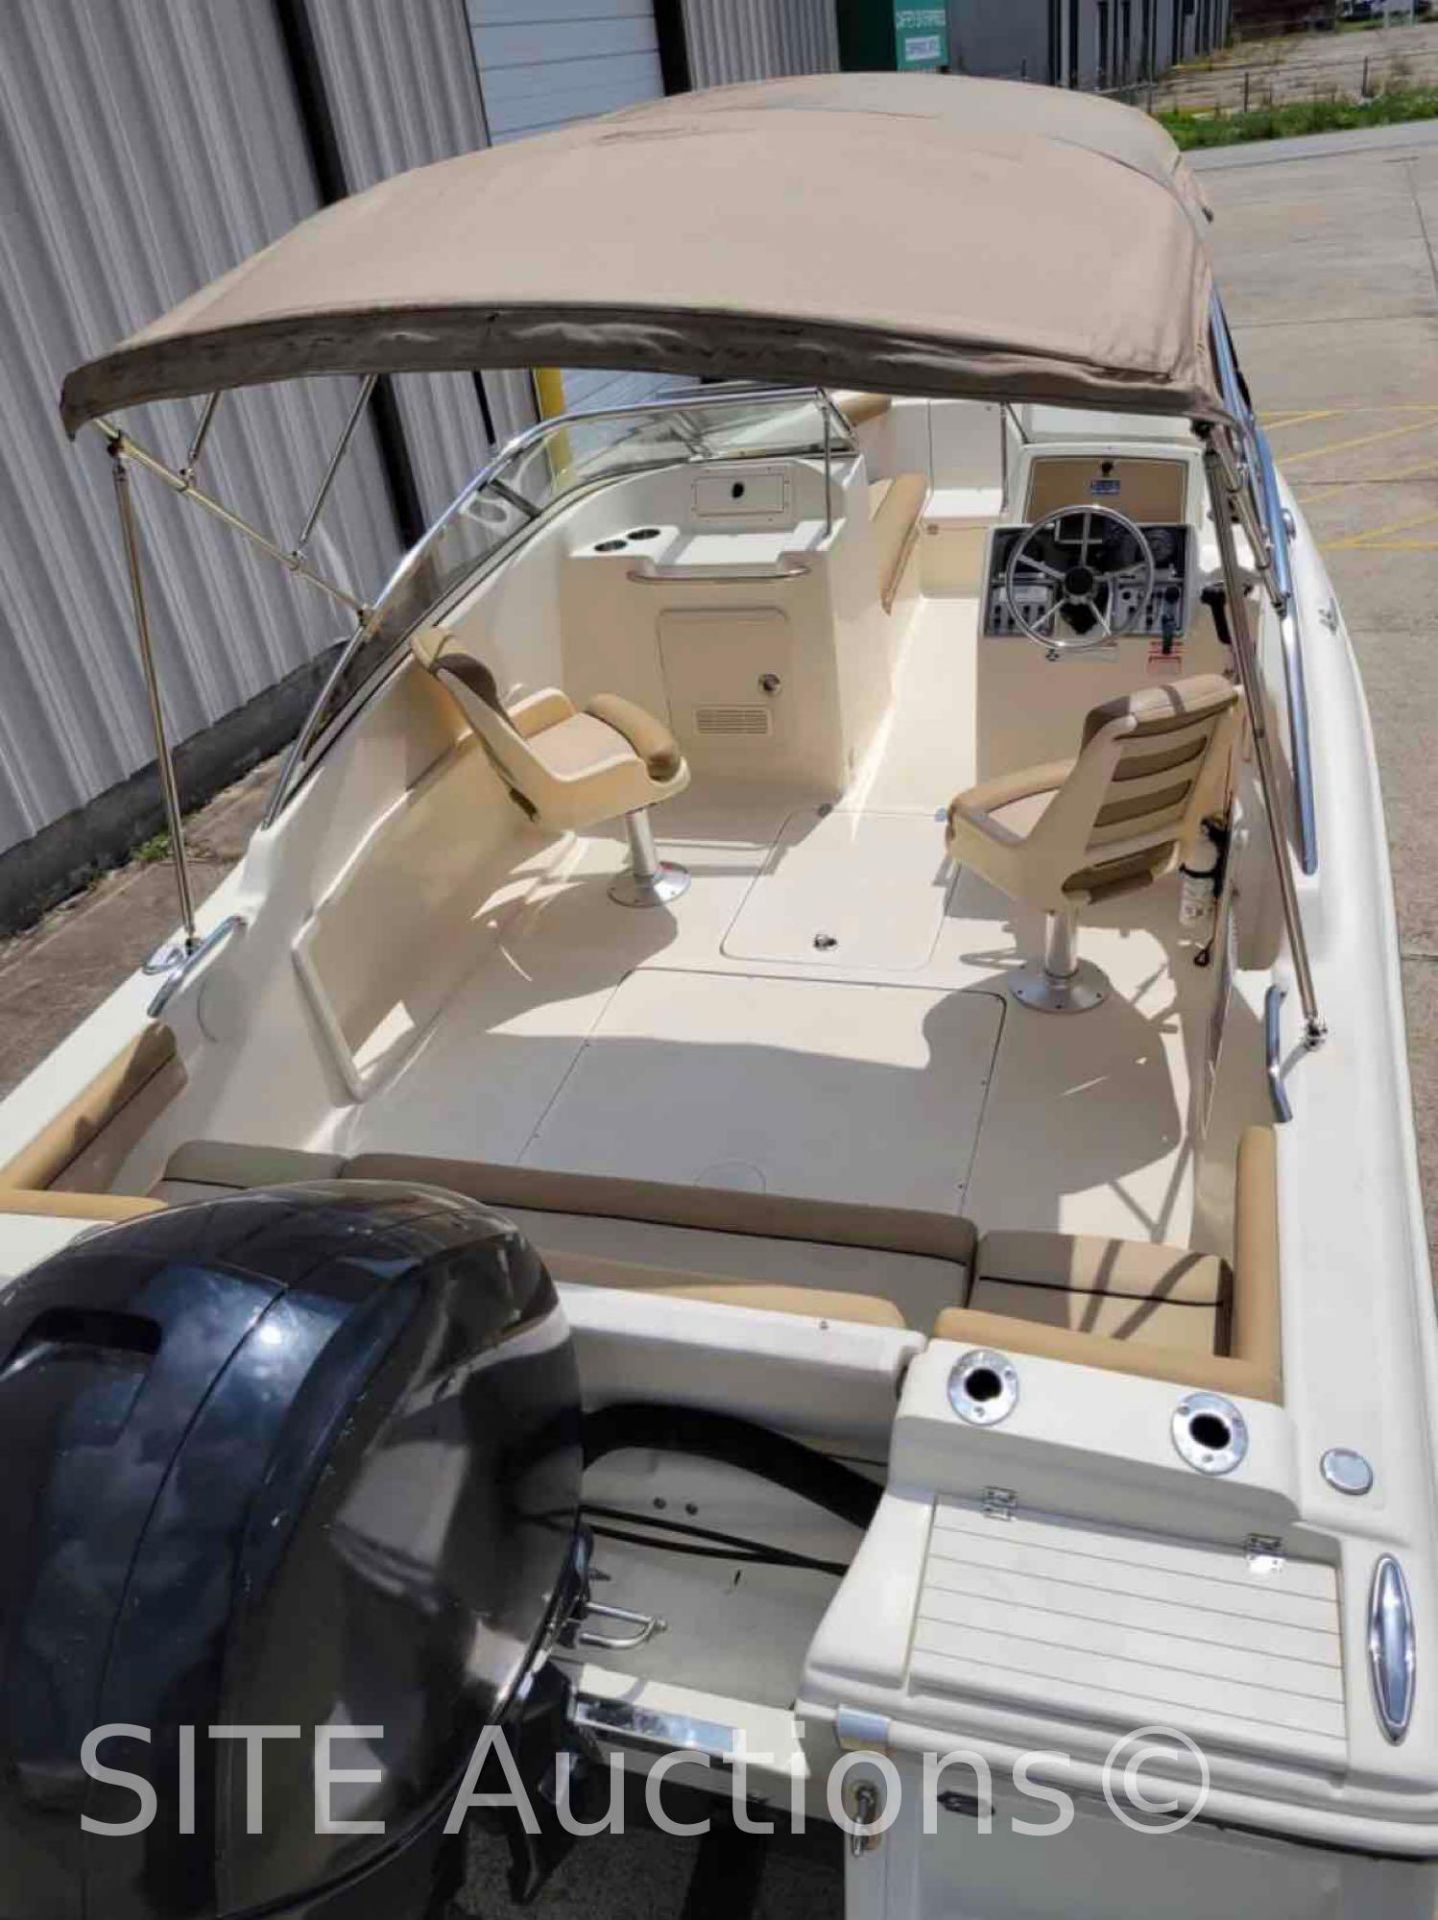 2020 Scout Dorado 20ft. Boat with Trailer - Image 16 of 21